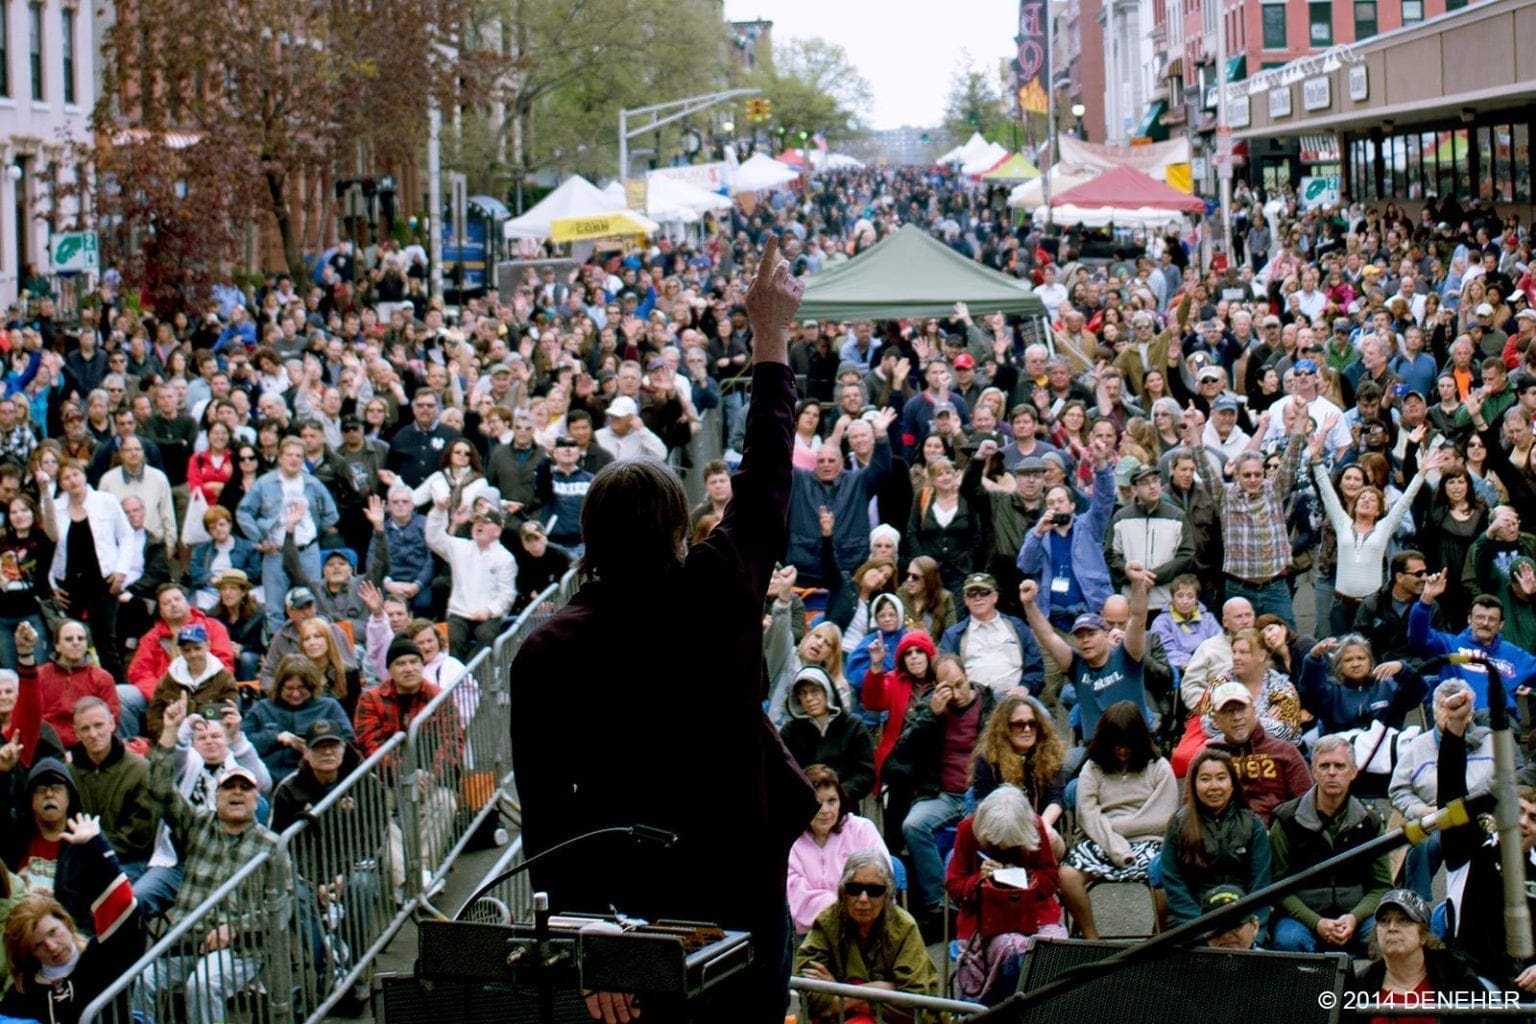 This Weekend 24th Annual Hoboken Arts & Music Festival New Jersey Digest